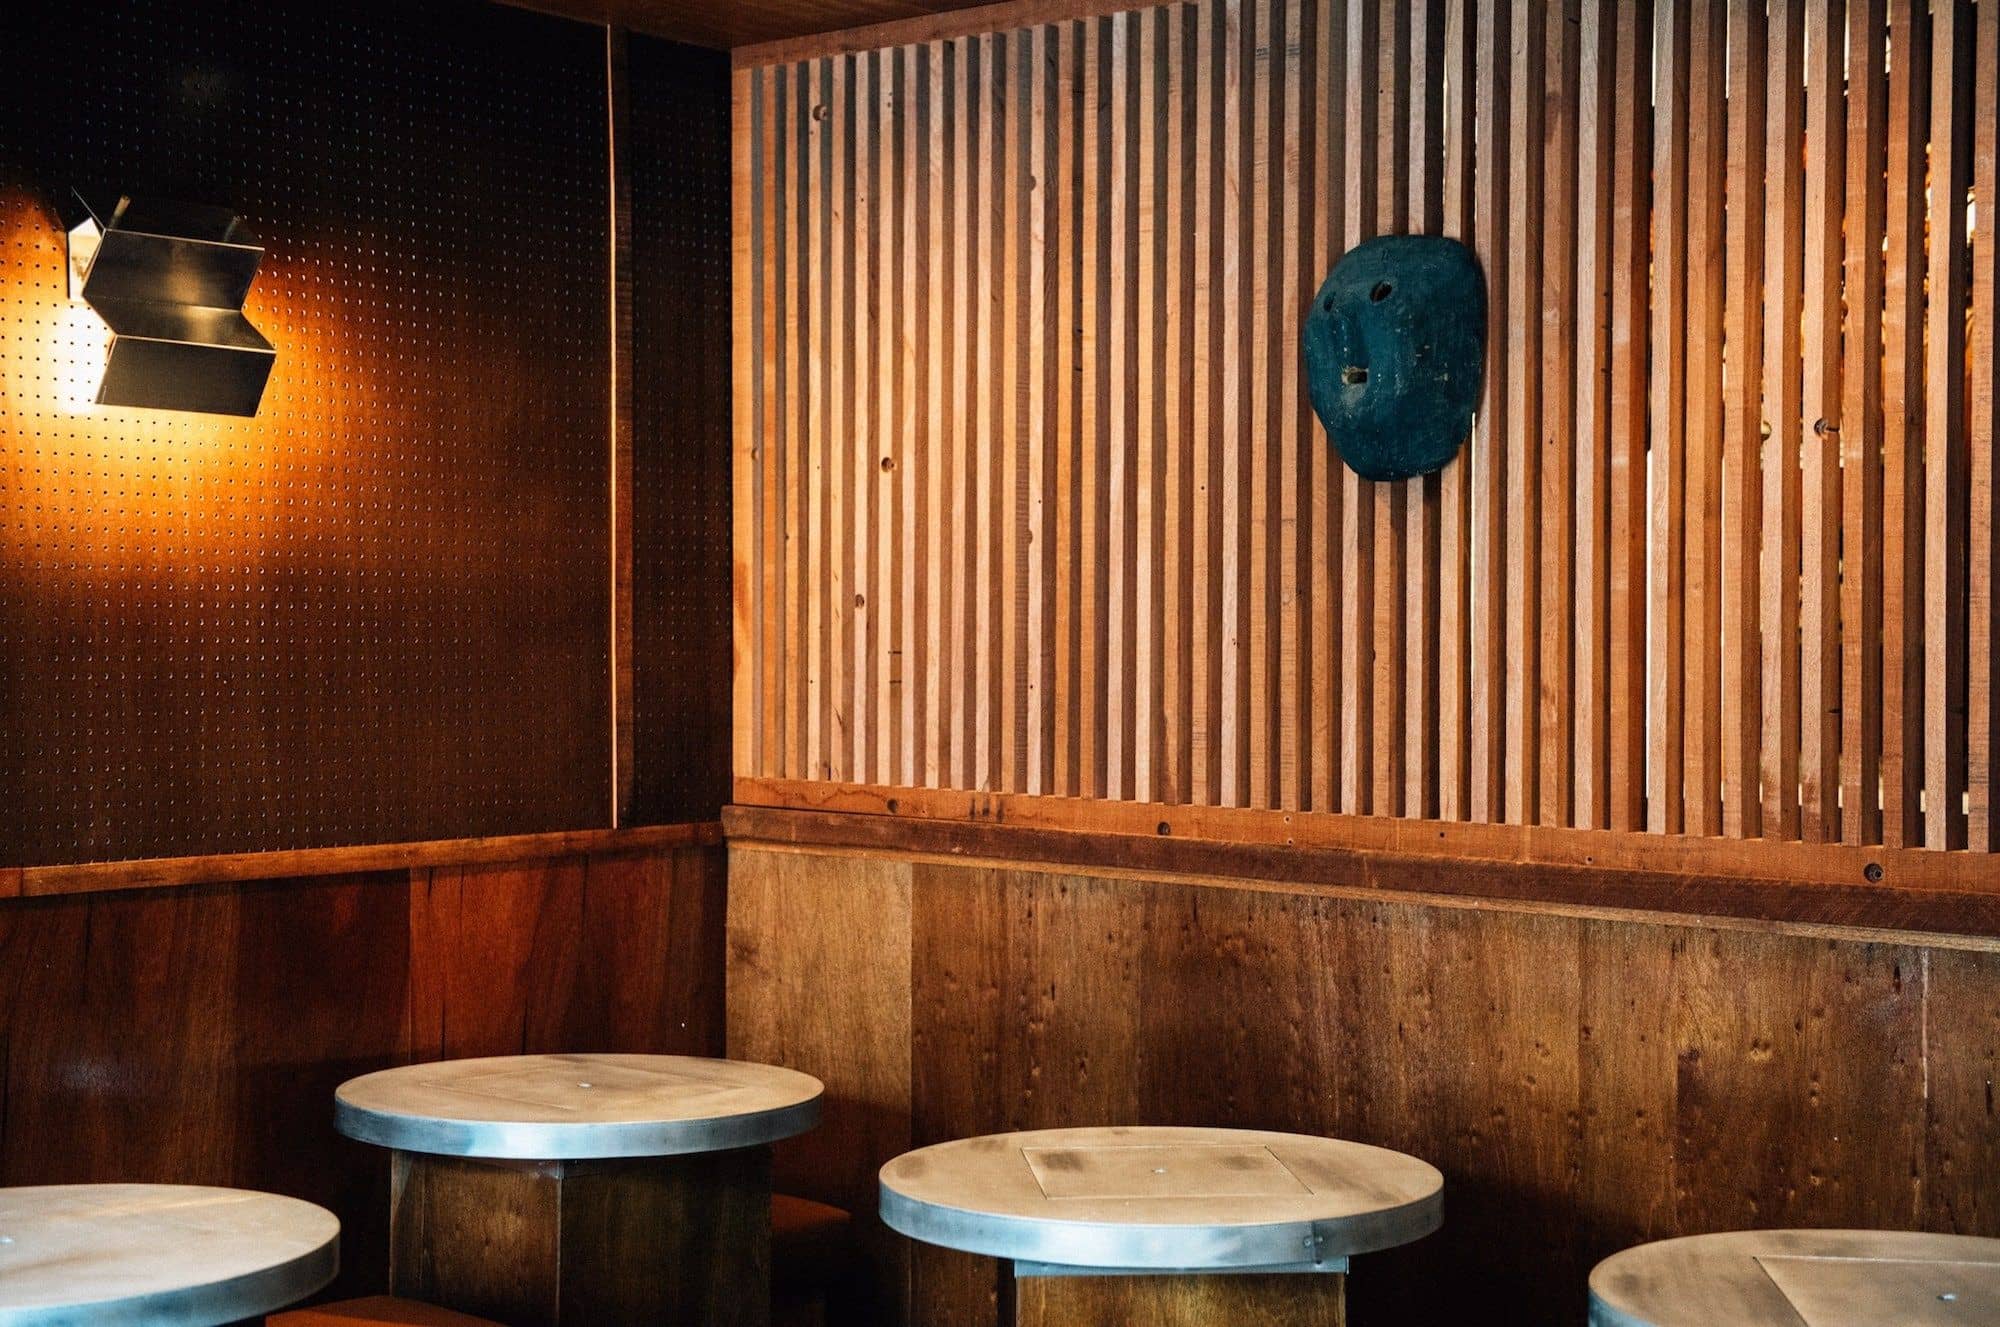 The interiors of Dr. Clark are dominated by coffee-stained plywood and traditional Hokkaido accent pieces.